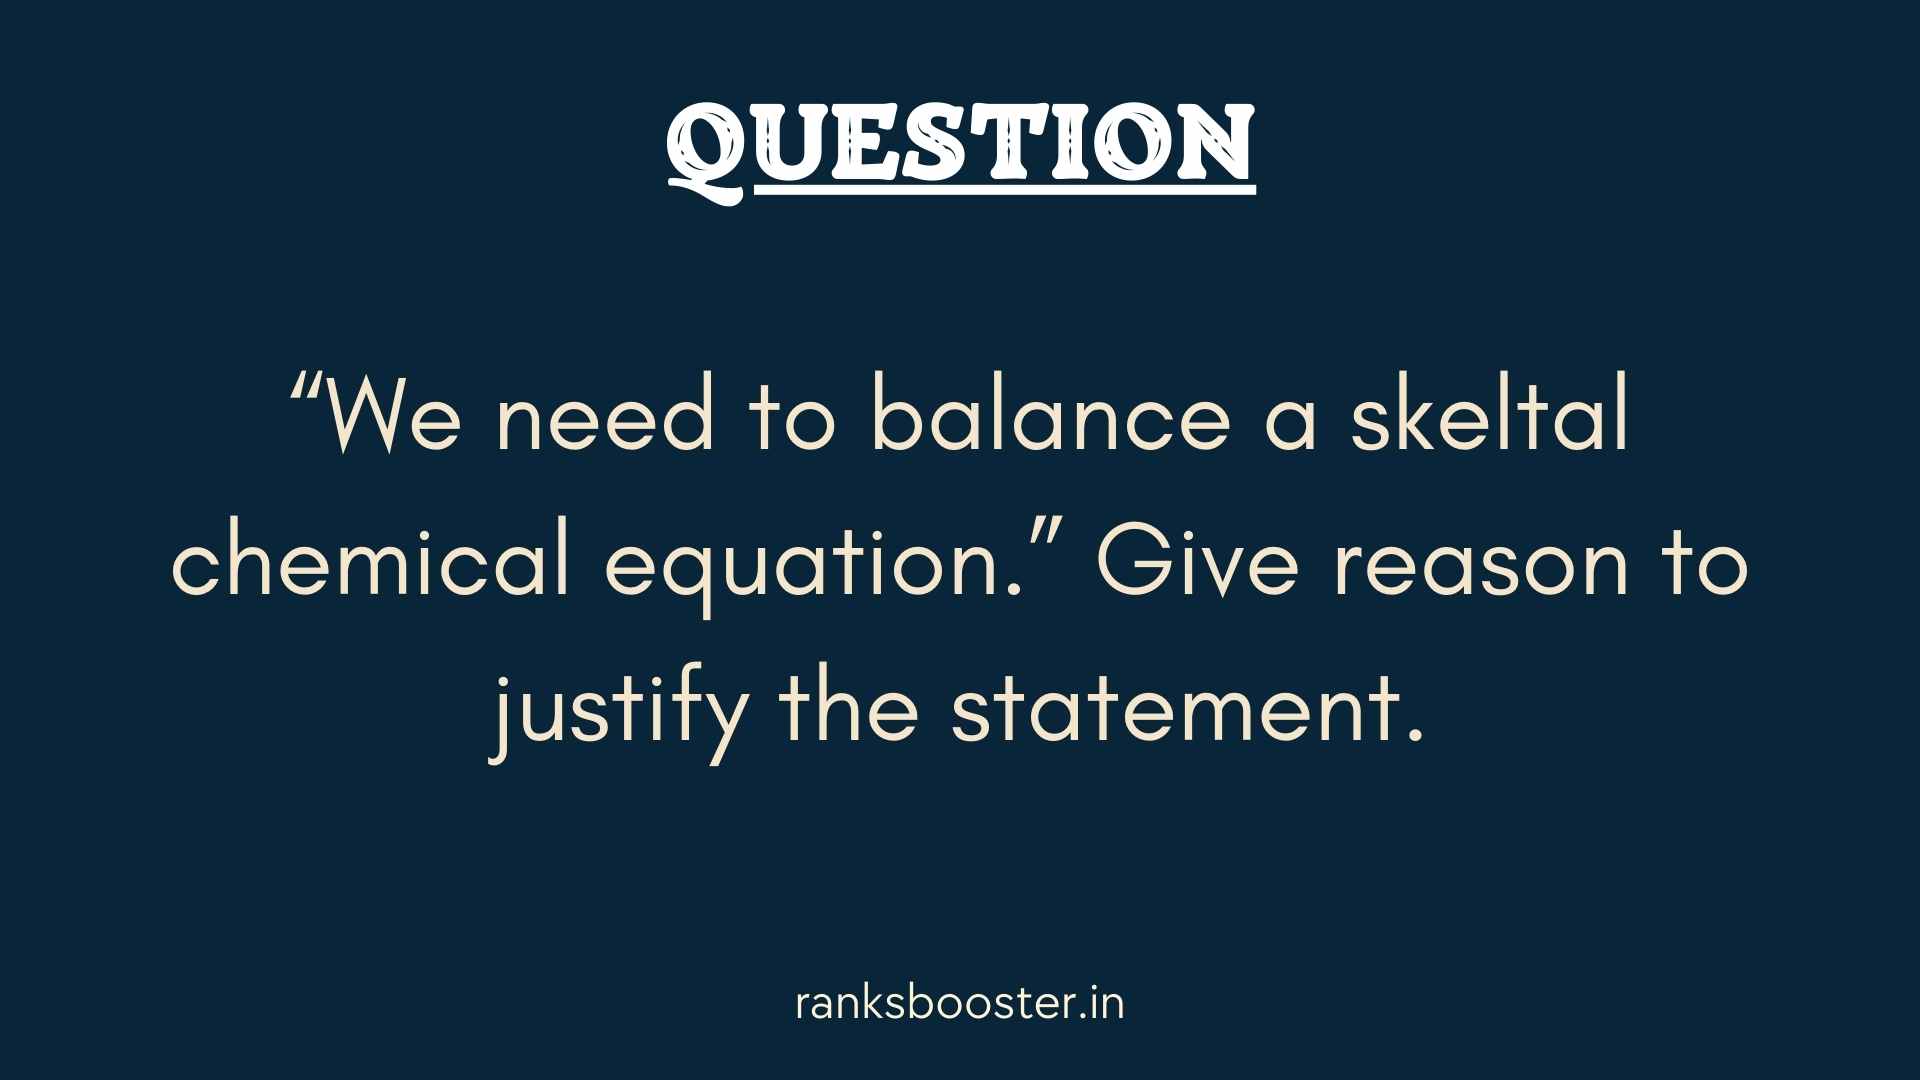 Question: “We need to balance a skeltal chemical equation.” Give reason to justify the statement